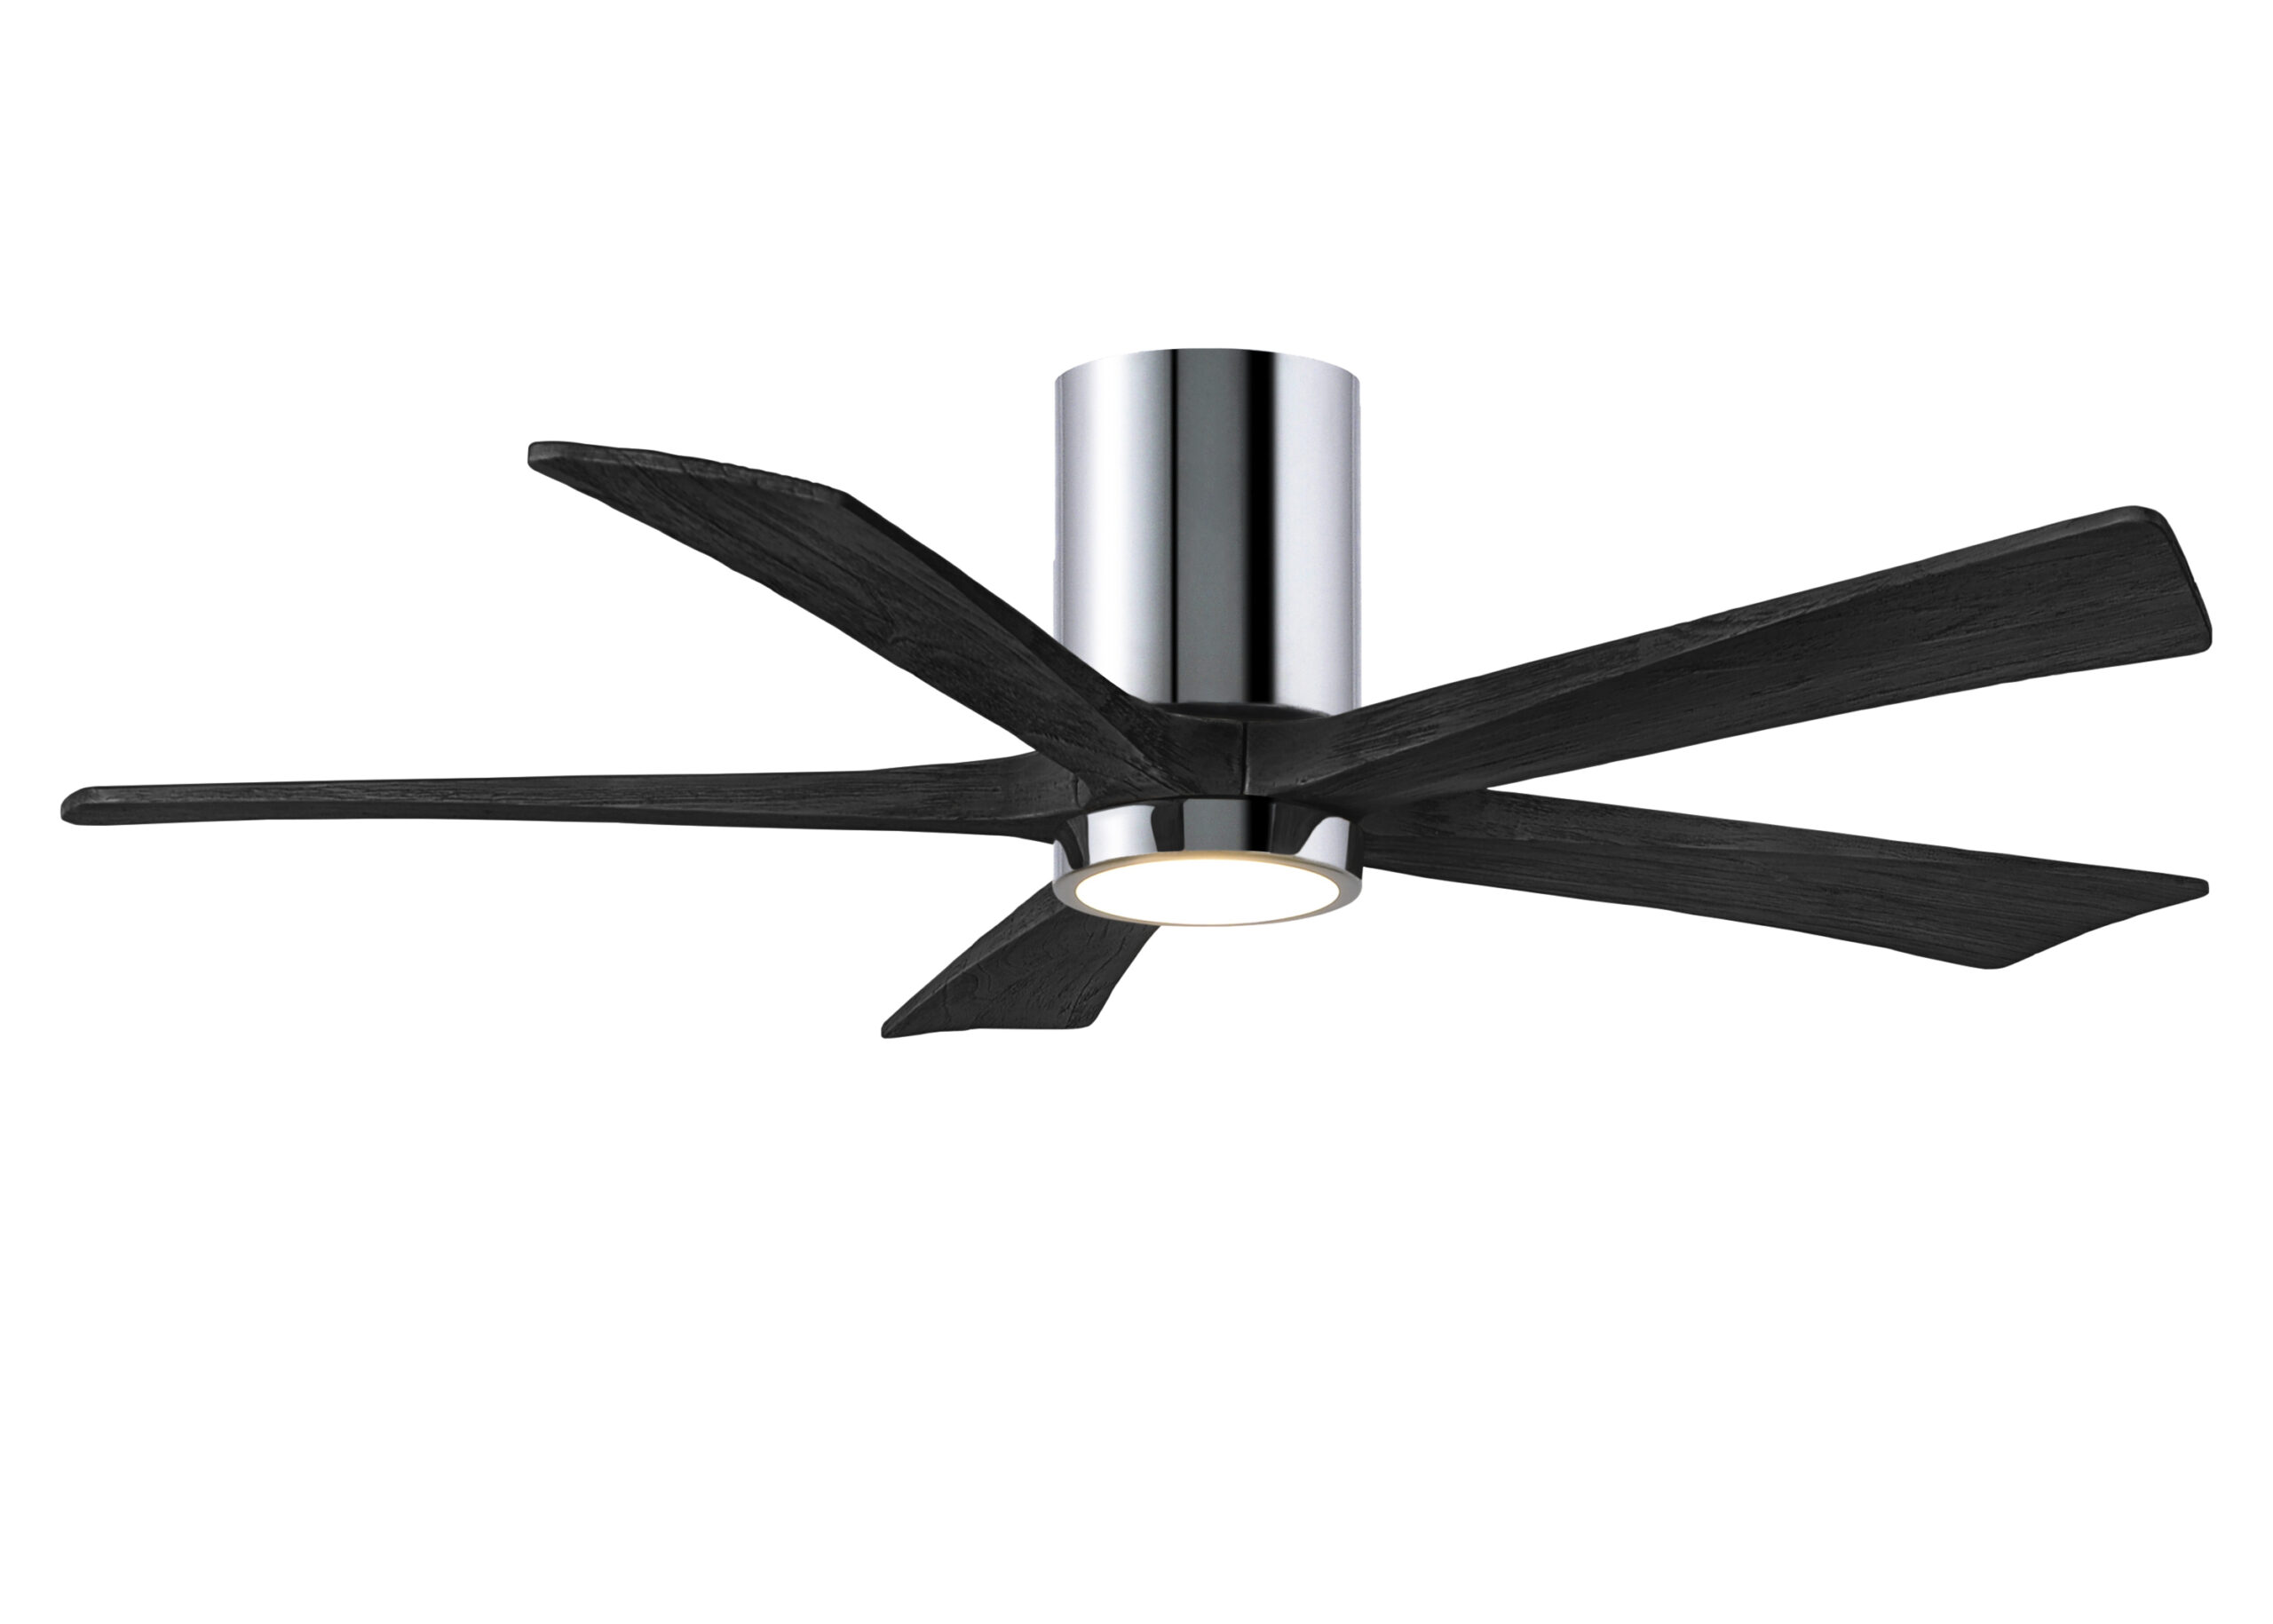 Irene-5HLK Ceiling Fan in Polished Chrome Finish with 52